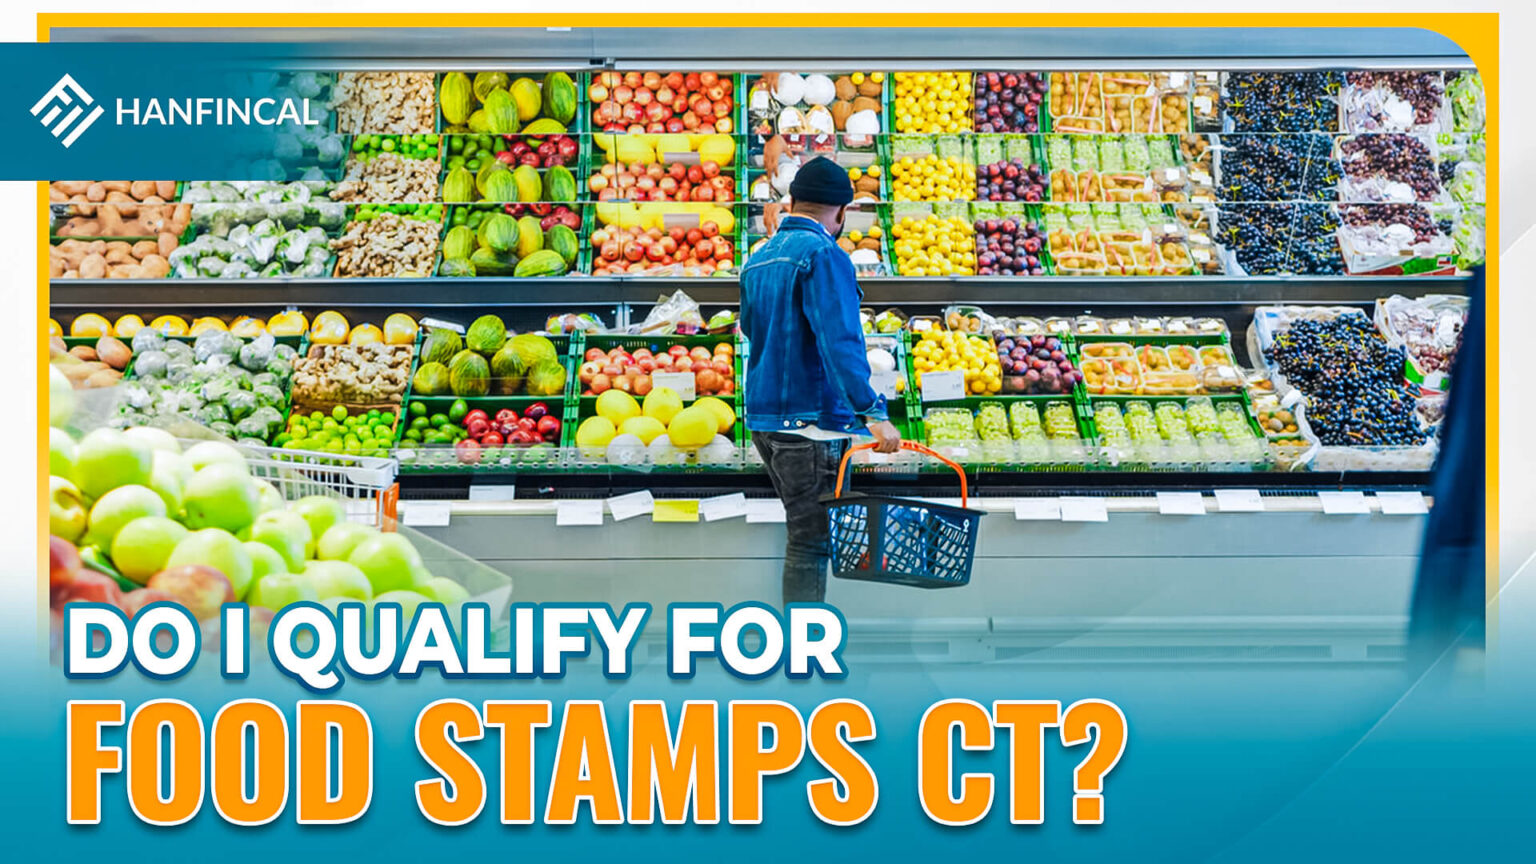 How to apply for Food Stamps in Connecticut (02/2023)? | Hanfincal